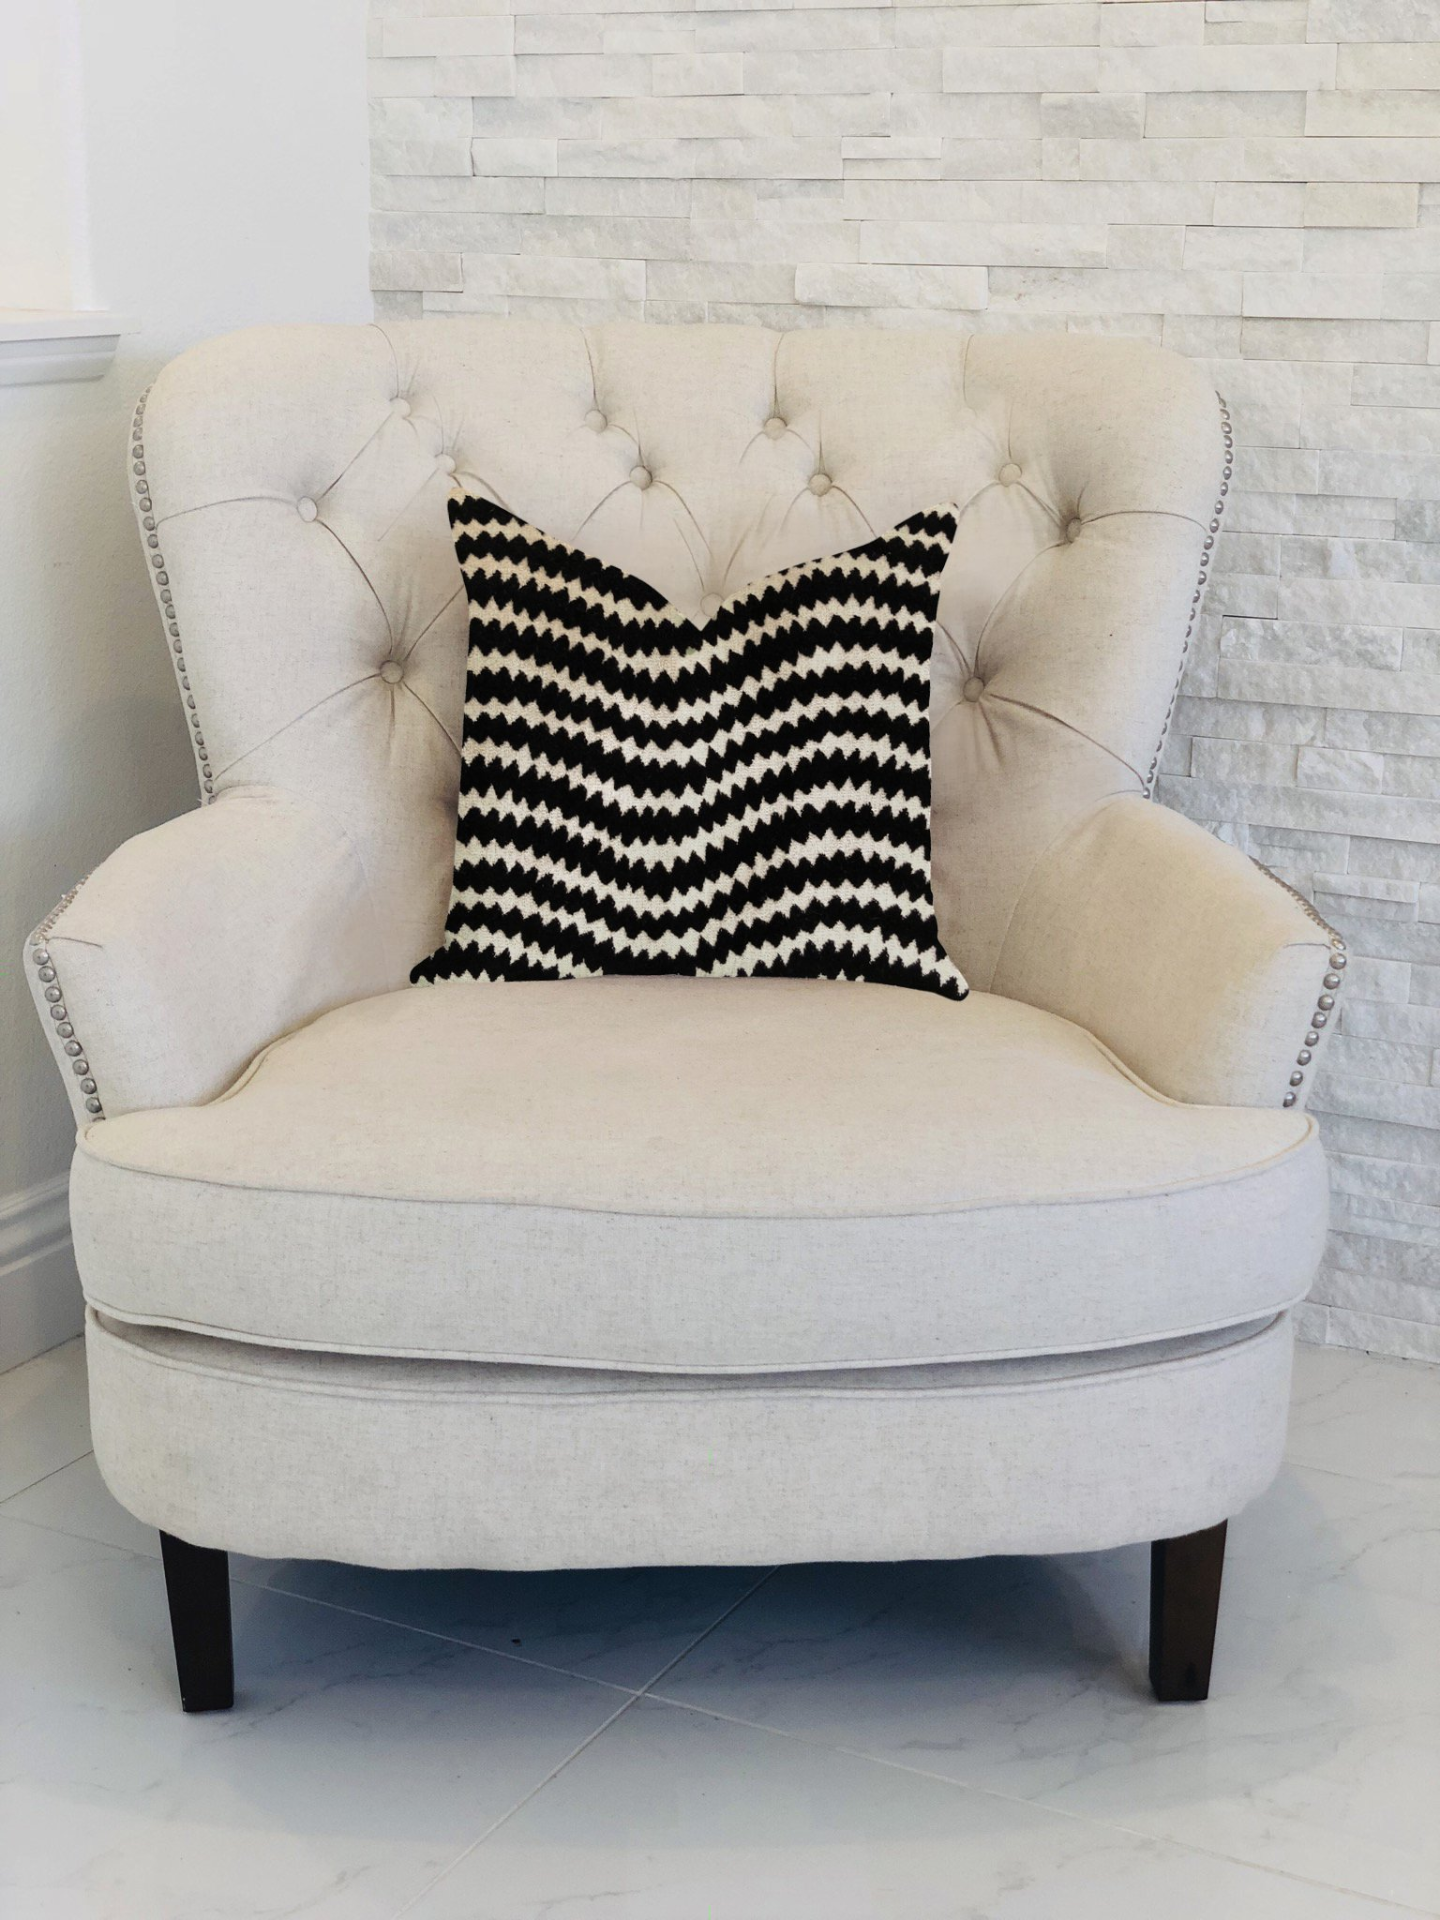 Jagged Fringe Luxury Throw Pillow in Black and Beige